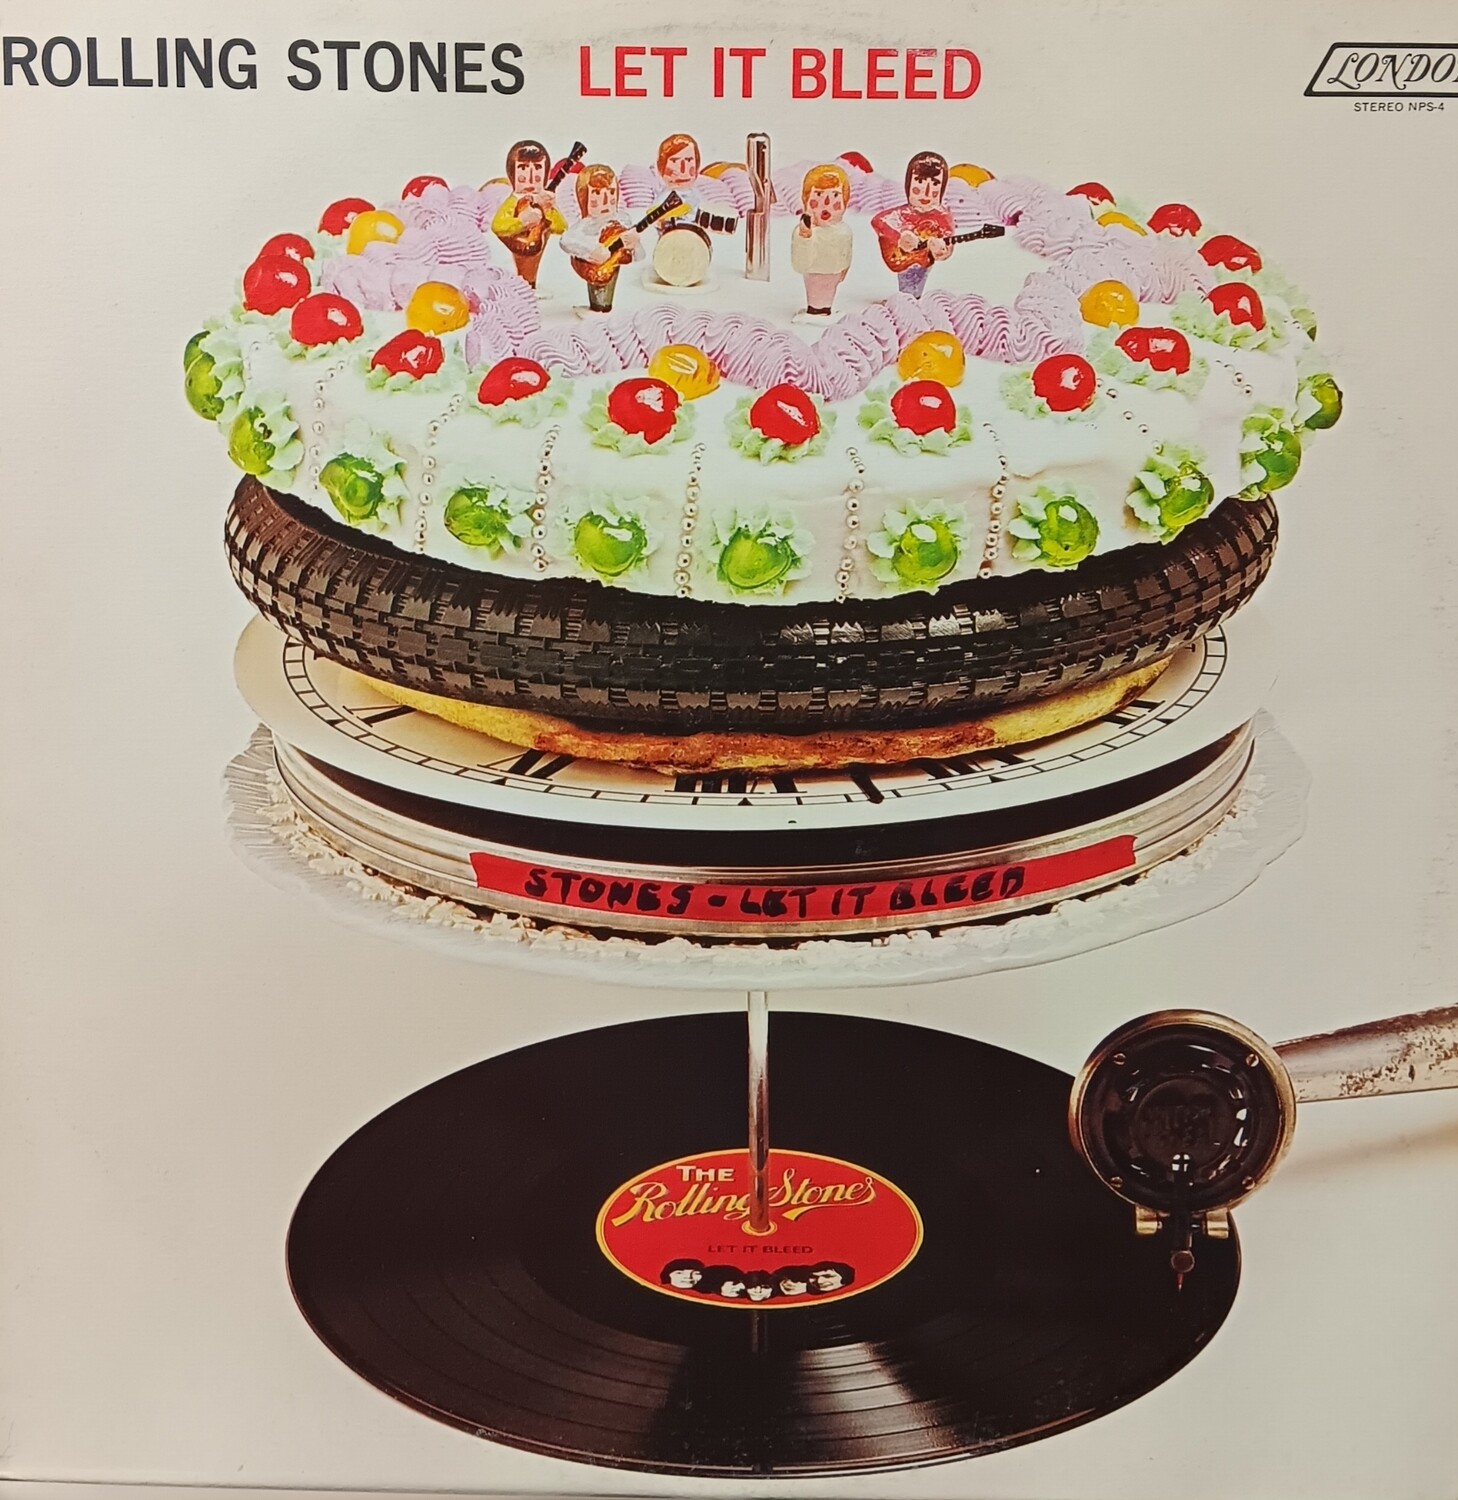 THE ROLLING STONES - Let it bleed